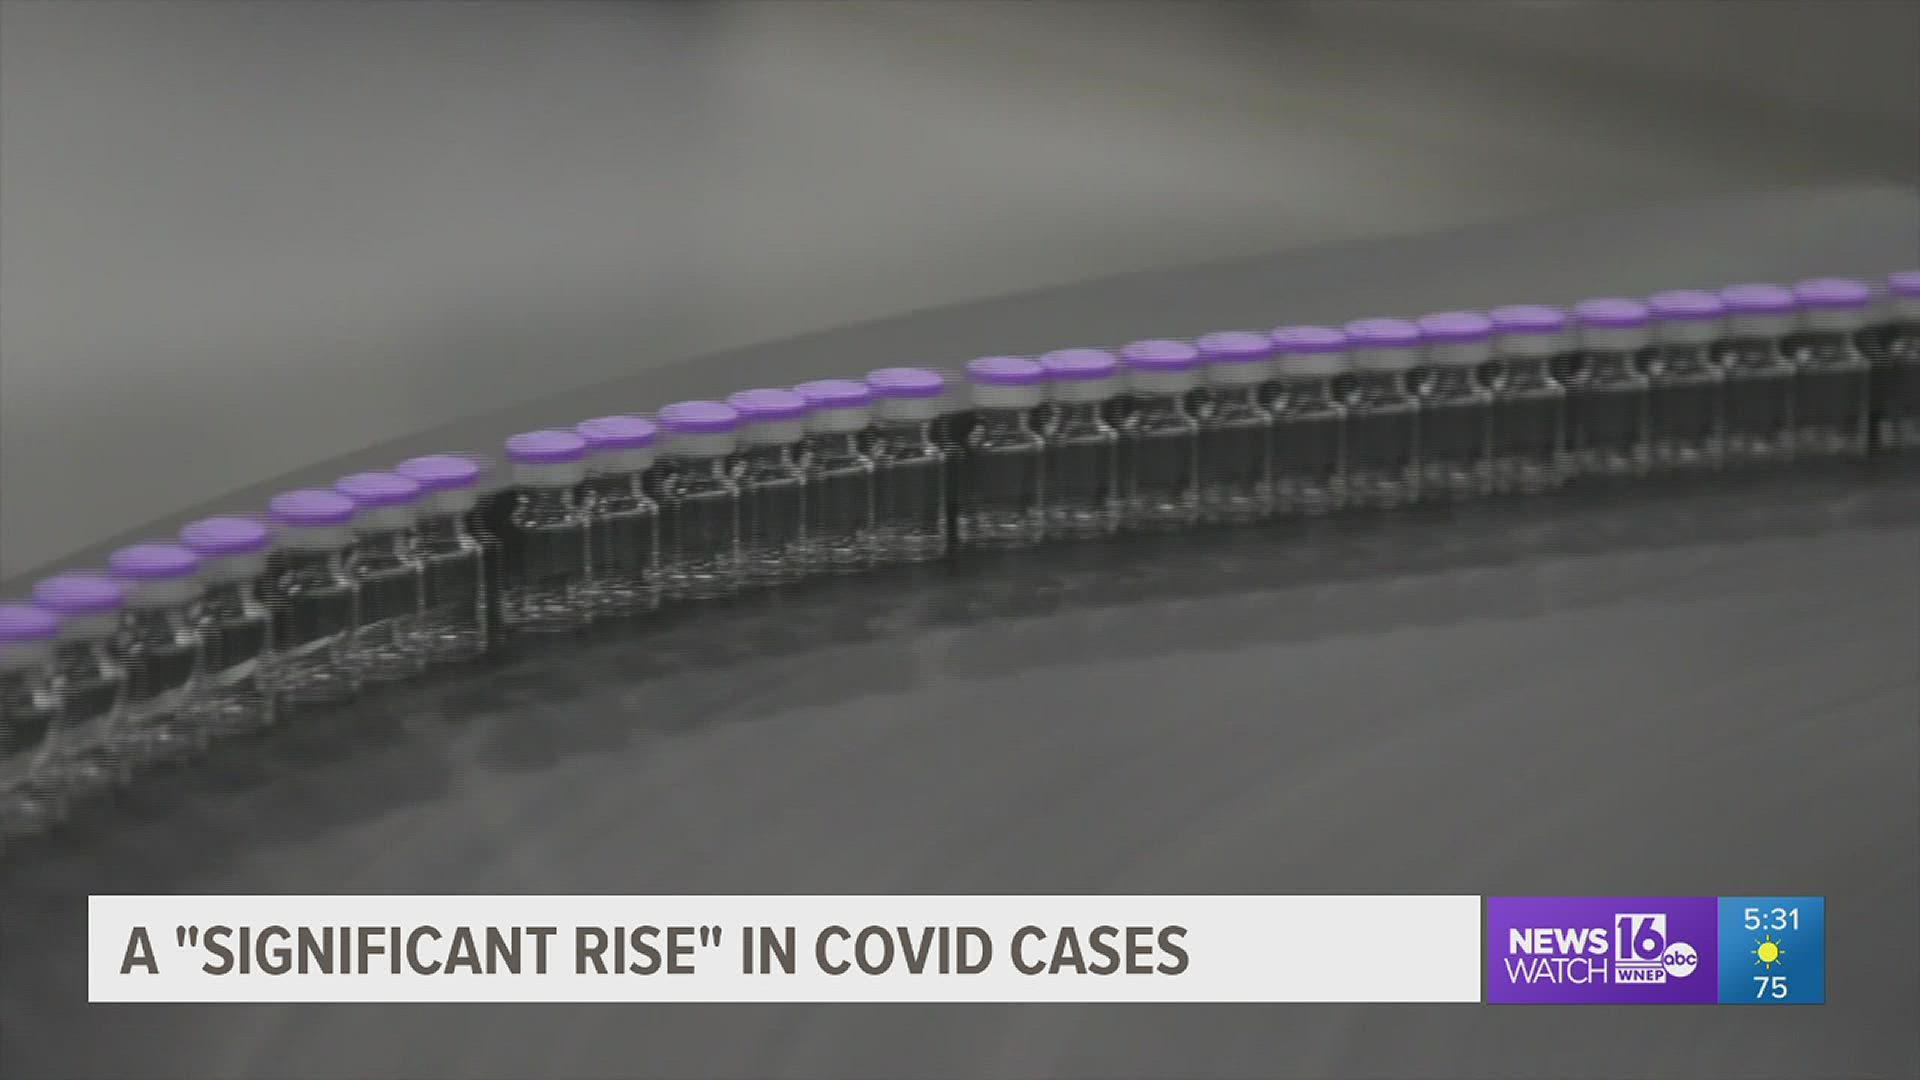 Doctors at Geisinger Medical Center near Danville are seeing a rise in Covid-19 cases across the region.